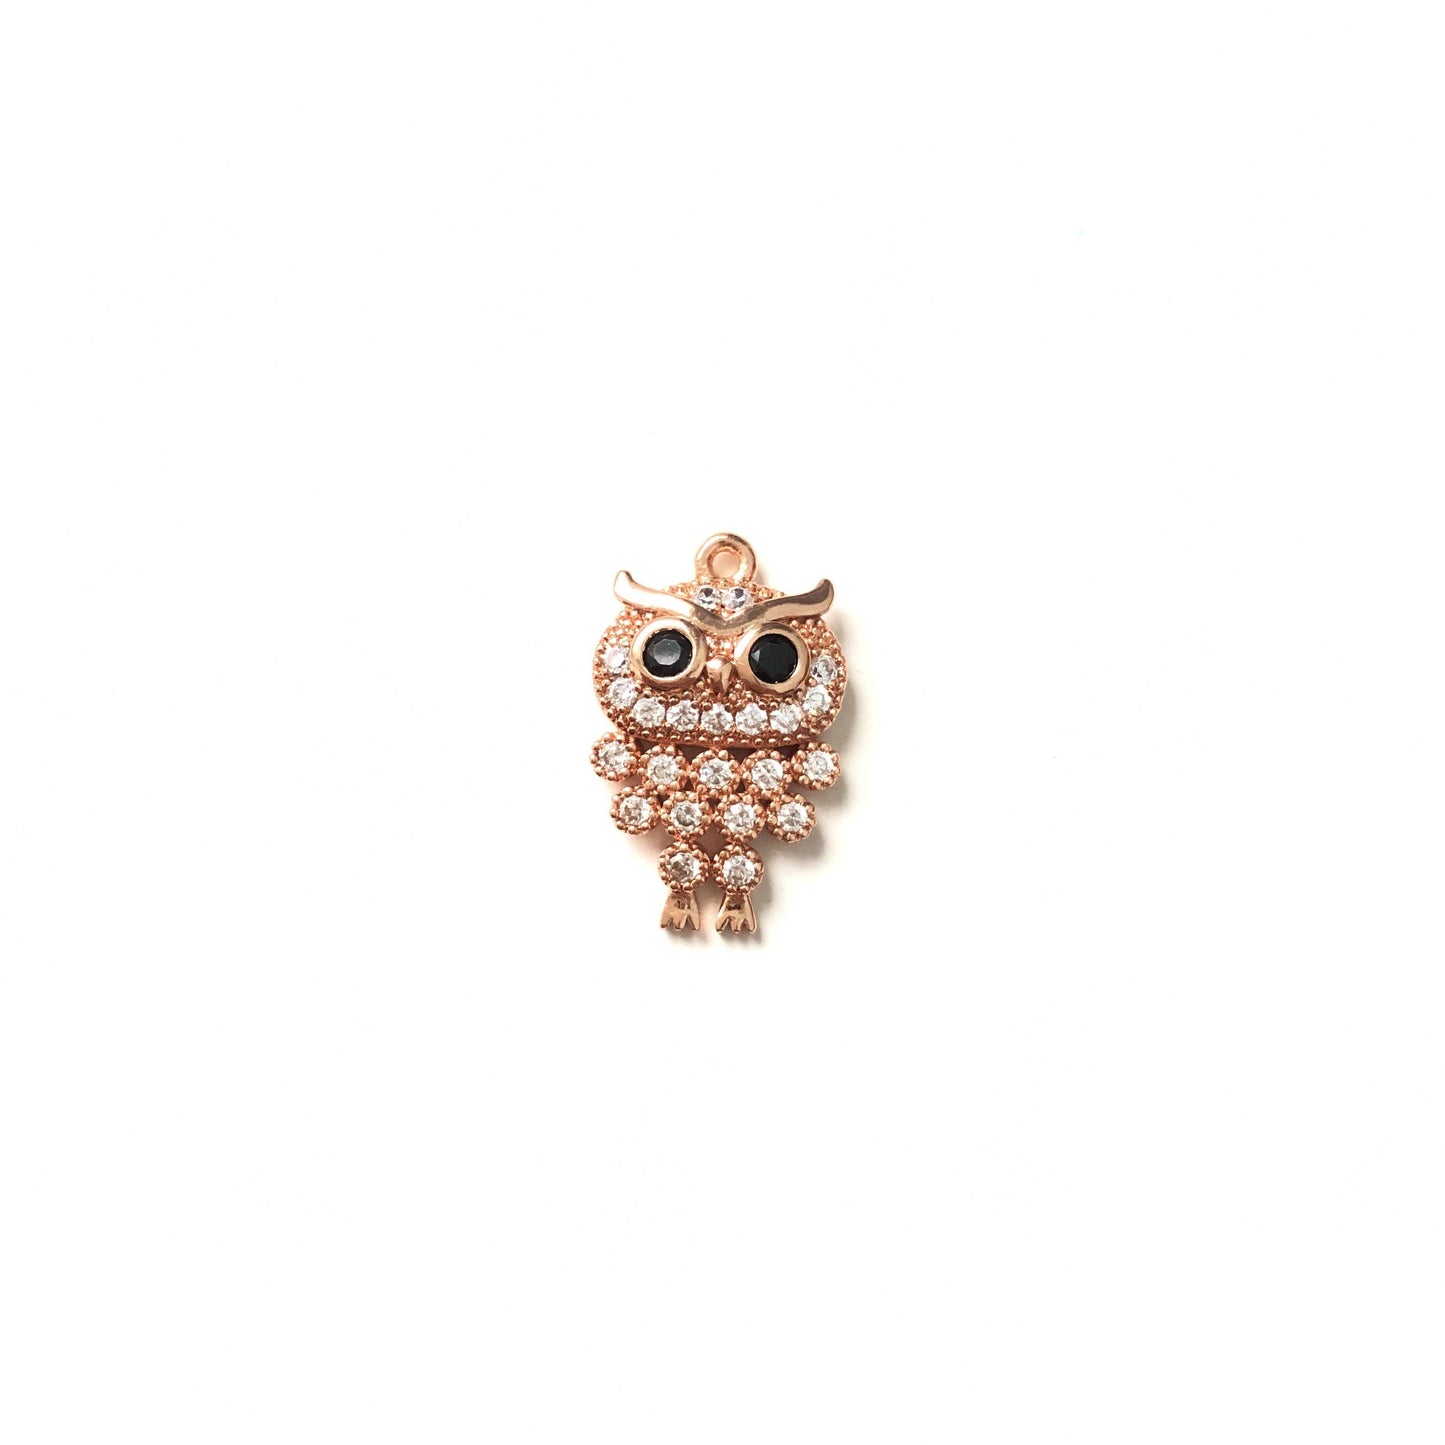 10pcs/lot 19*12mm CZ Paved Owl Charms Rose Gold CZ Paved Charms Animals & Insects Charms Beads Beyond